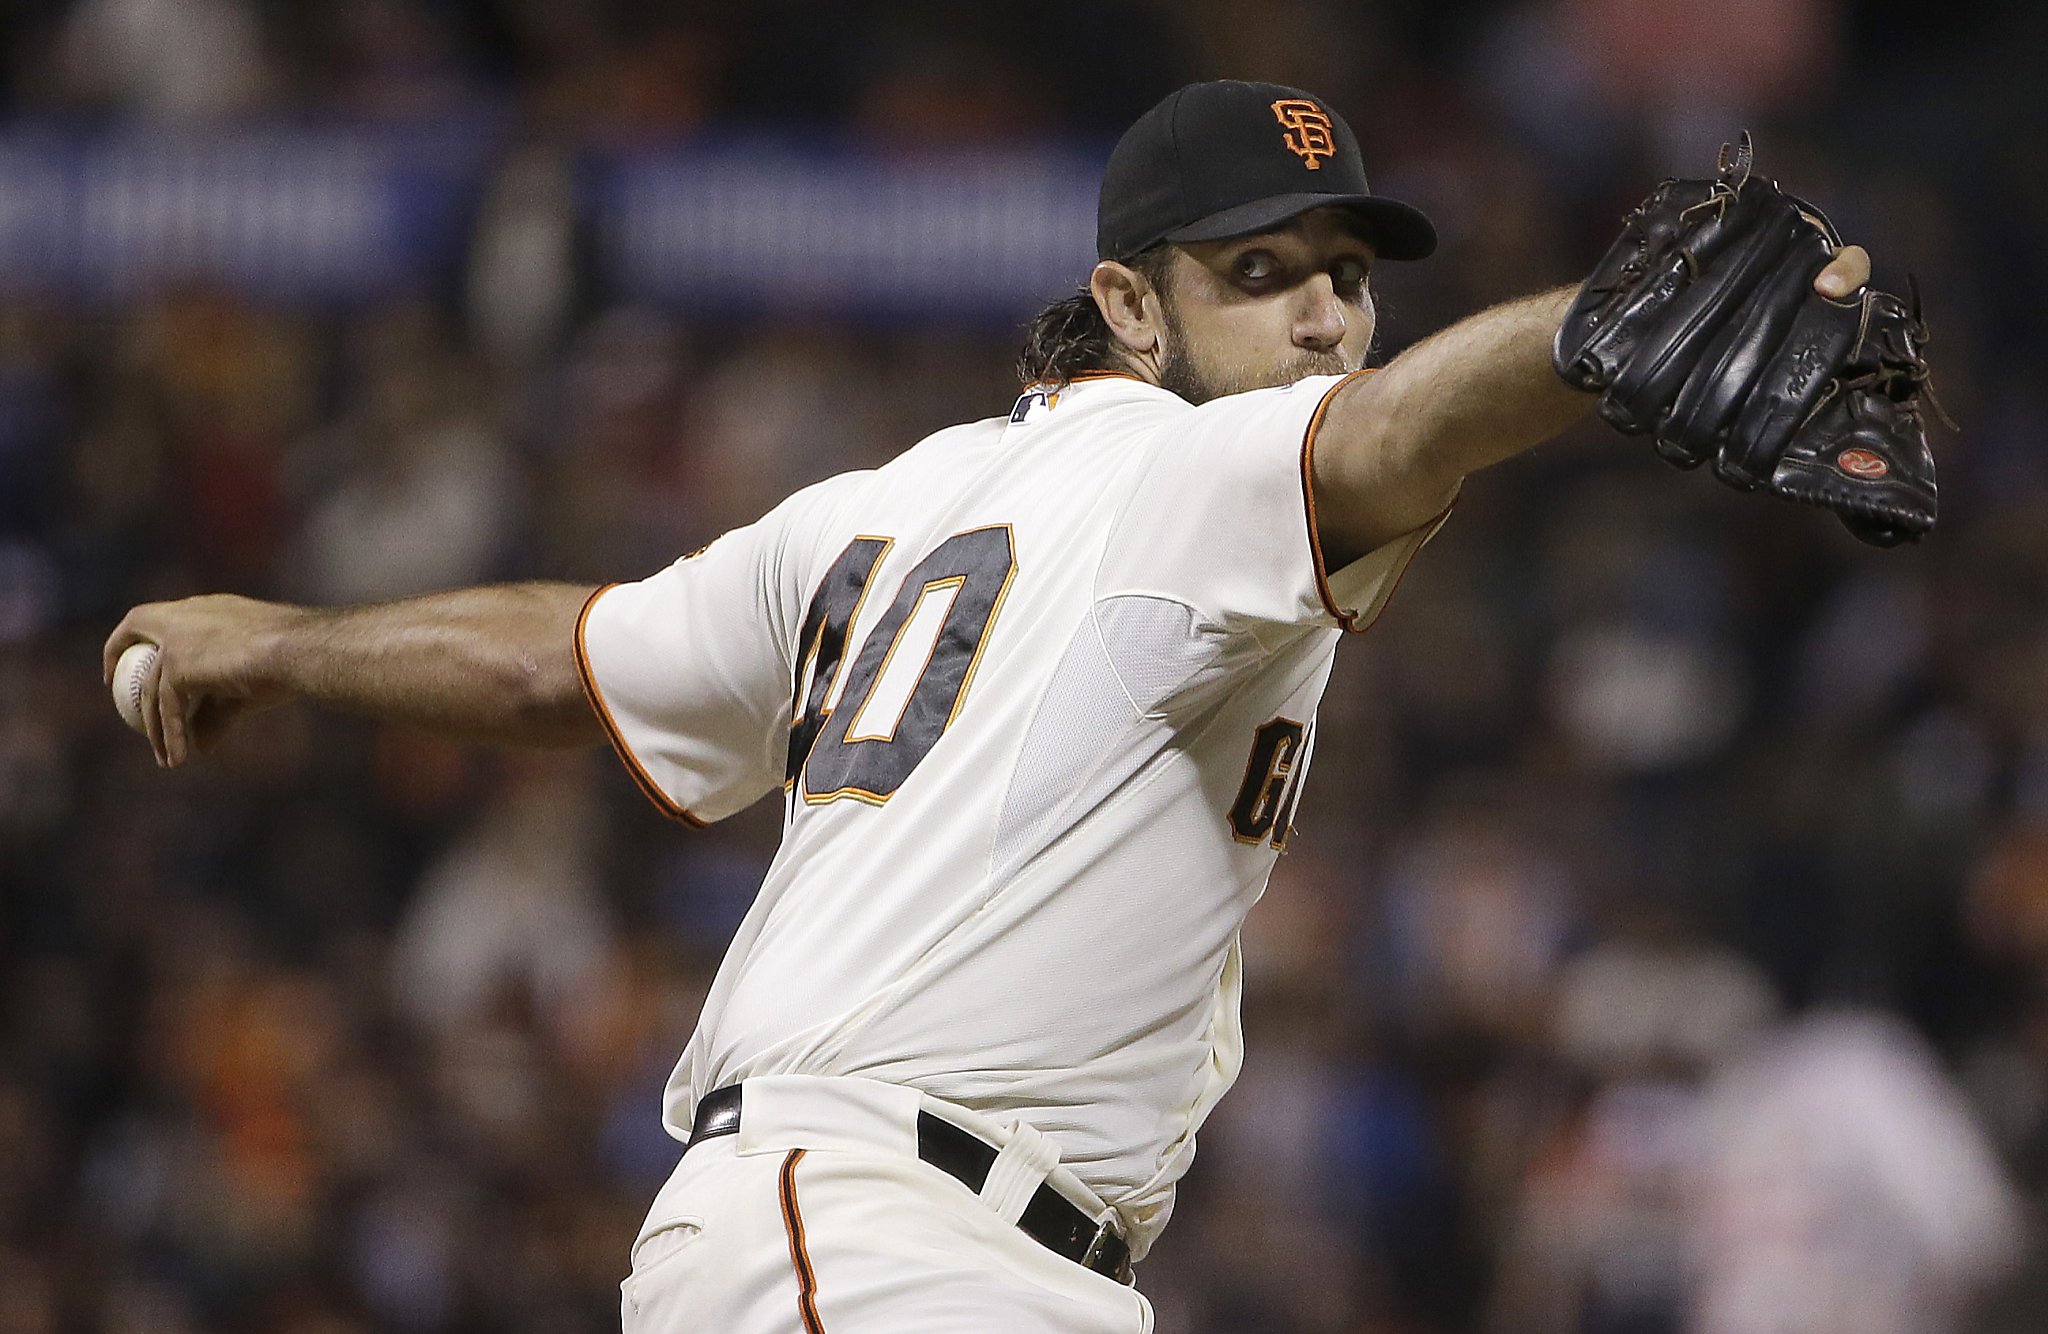 Madison Bumgarner makes Giant leap to No. 1 in MLB jersey sales